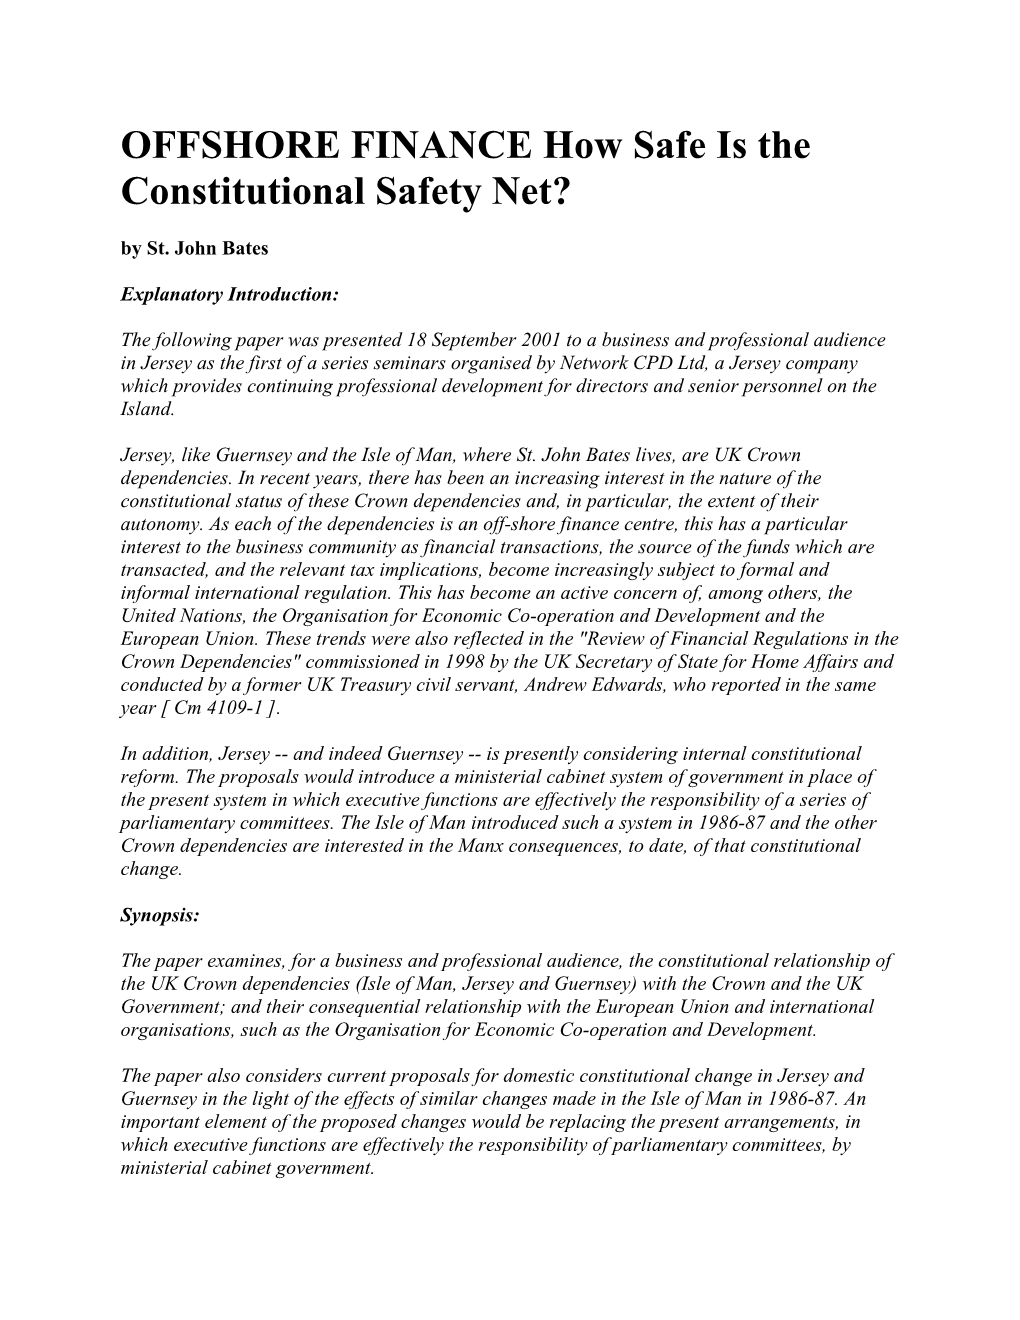 OFFSHORE FINANCE How Safe Is the Constitutional Safety Net? by St